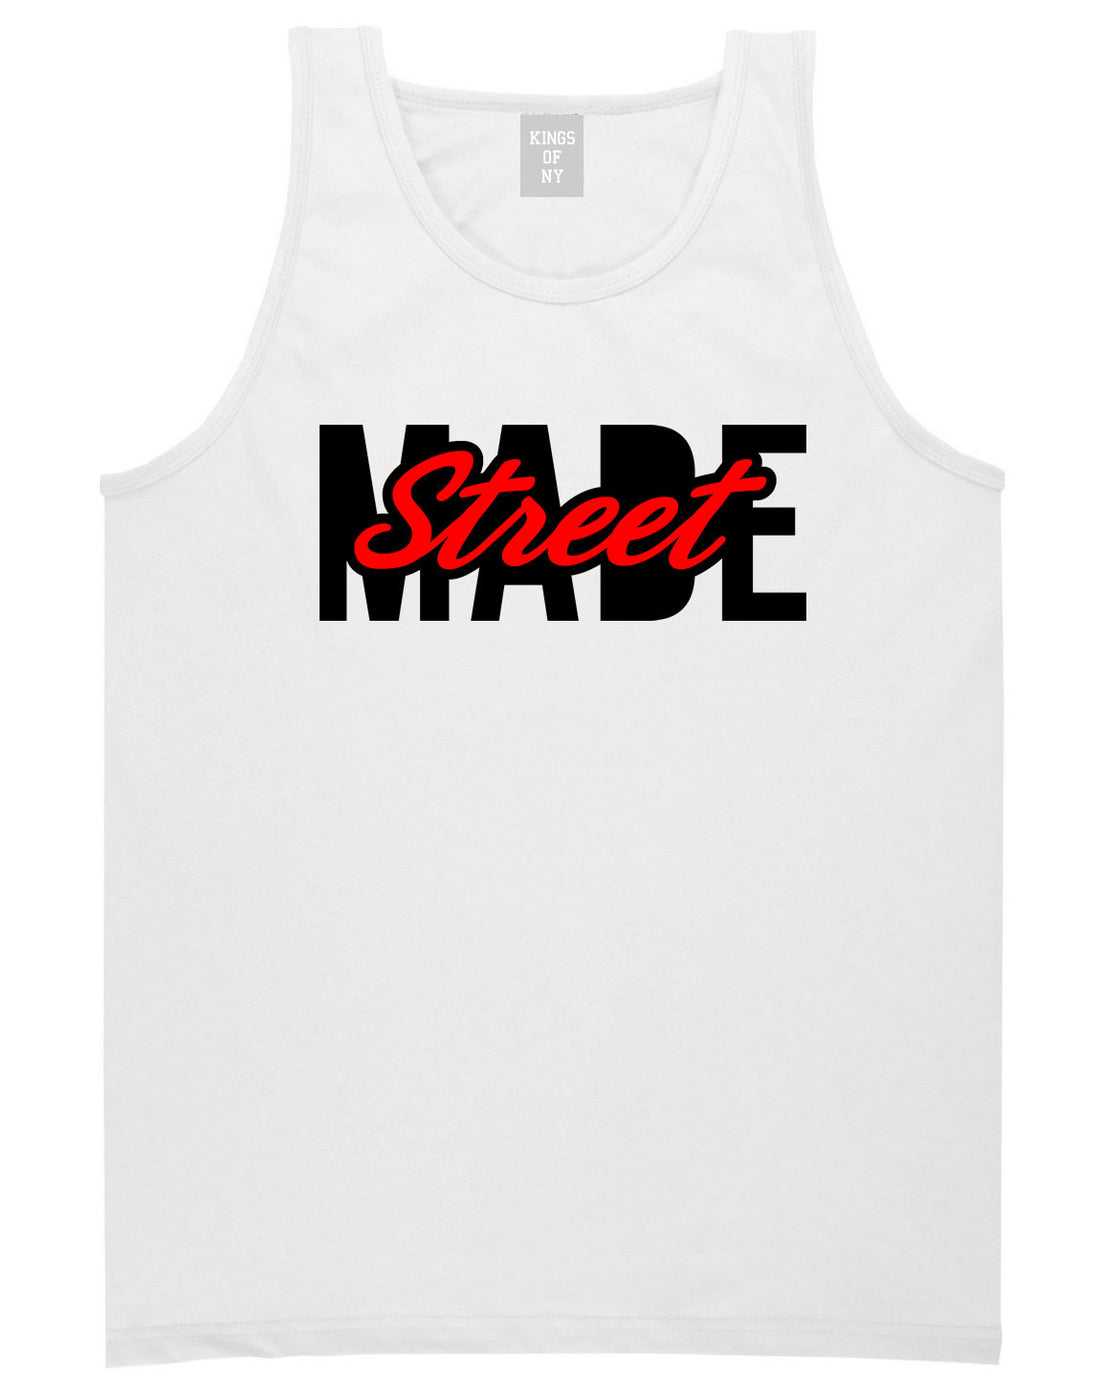 Kings Of NY Street Made Tank Top in White